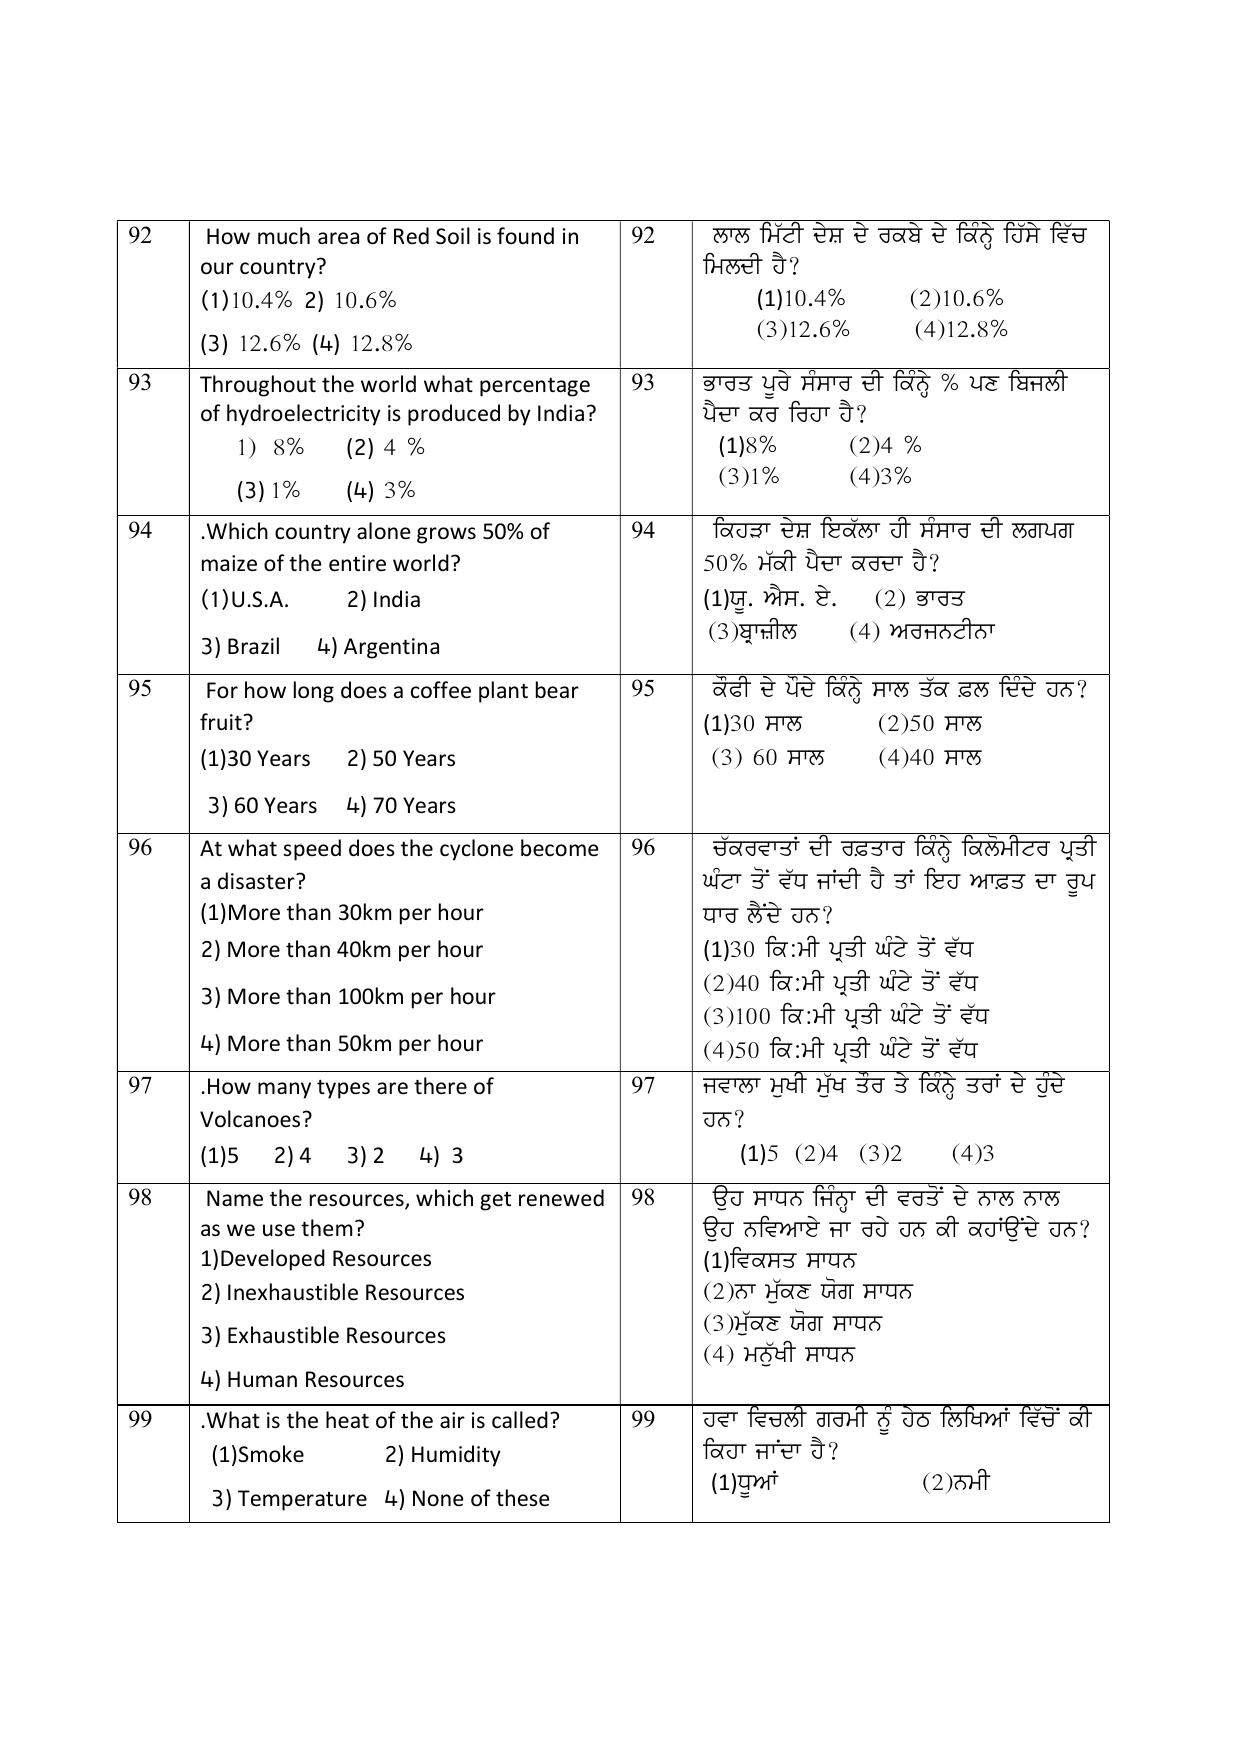 Punjab School of Eminence Class 9 Sample Question Paper - Page 17